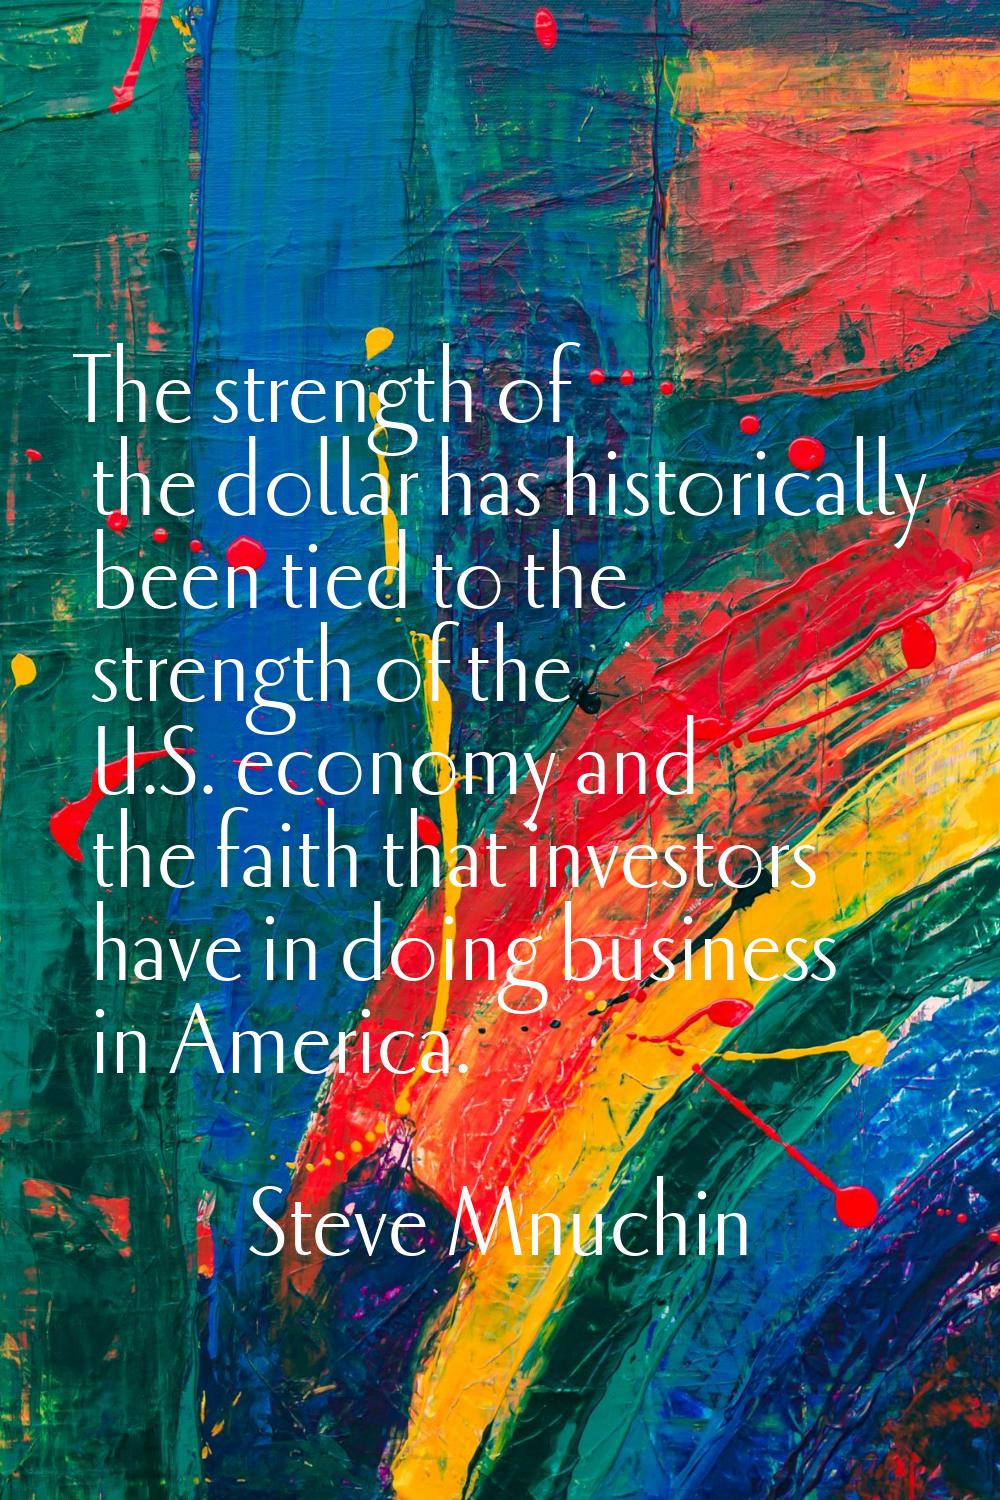 The strength of the dollar has historically been tied to the strength of the U.S. economy and the f